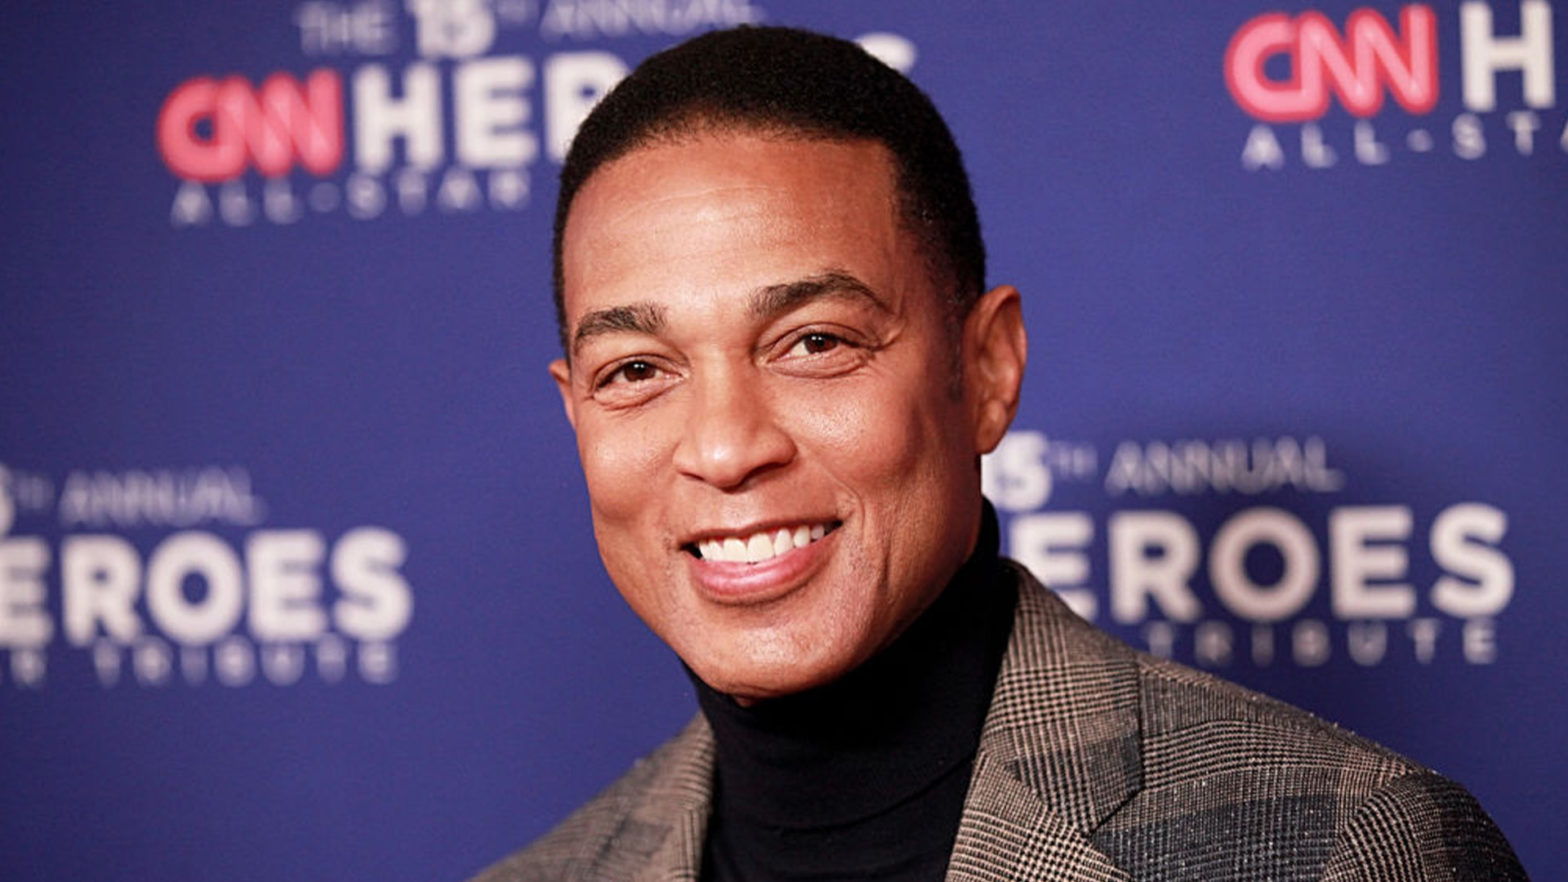 Don Lemon Spent 17 Years With CNN And Amassed An Estimated $12M Net Worth Along The Way